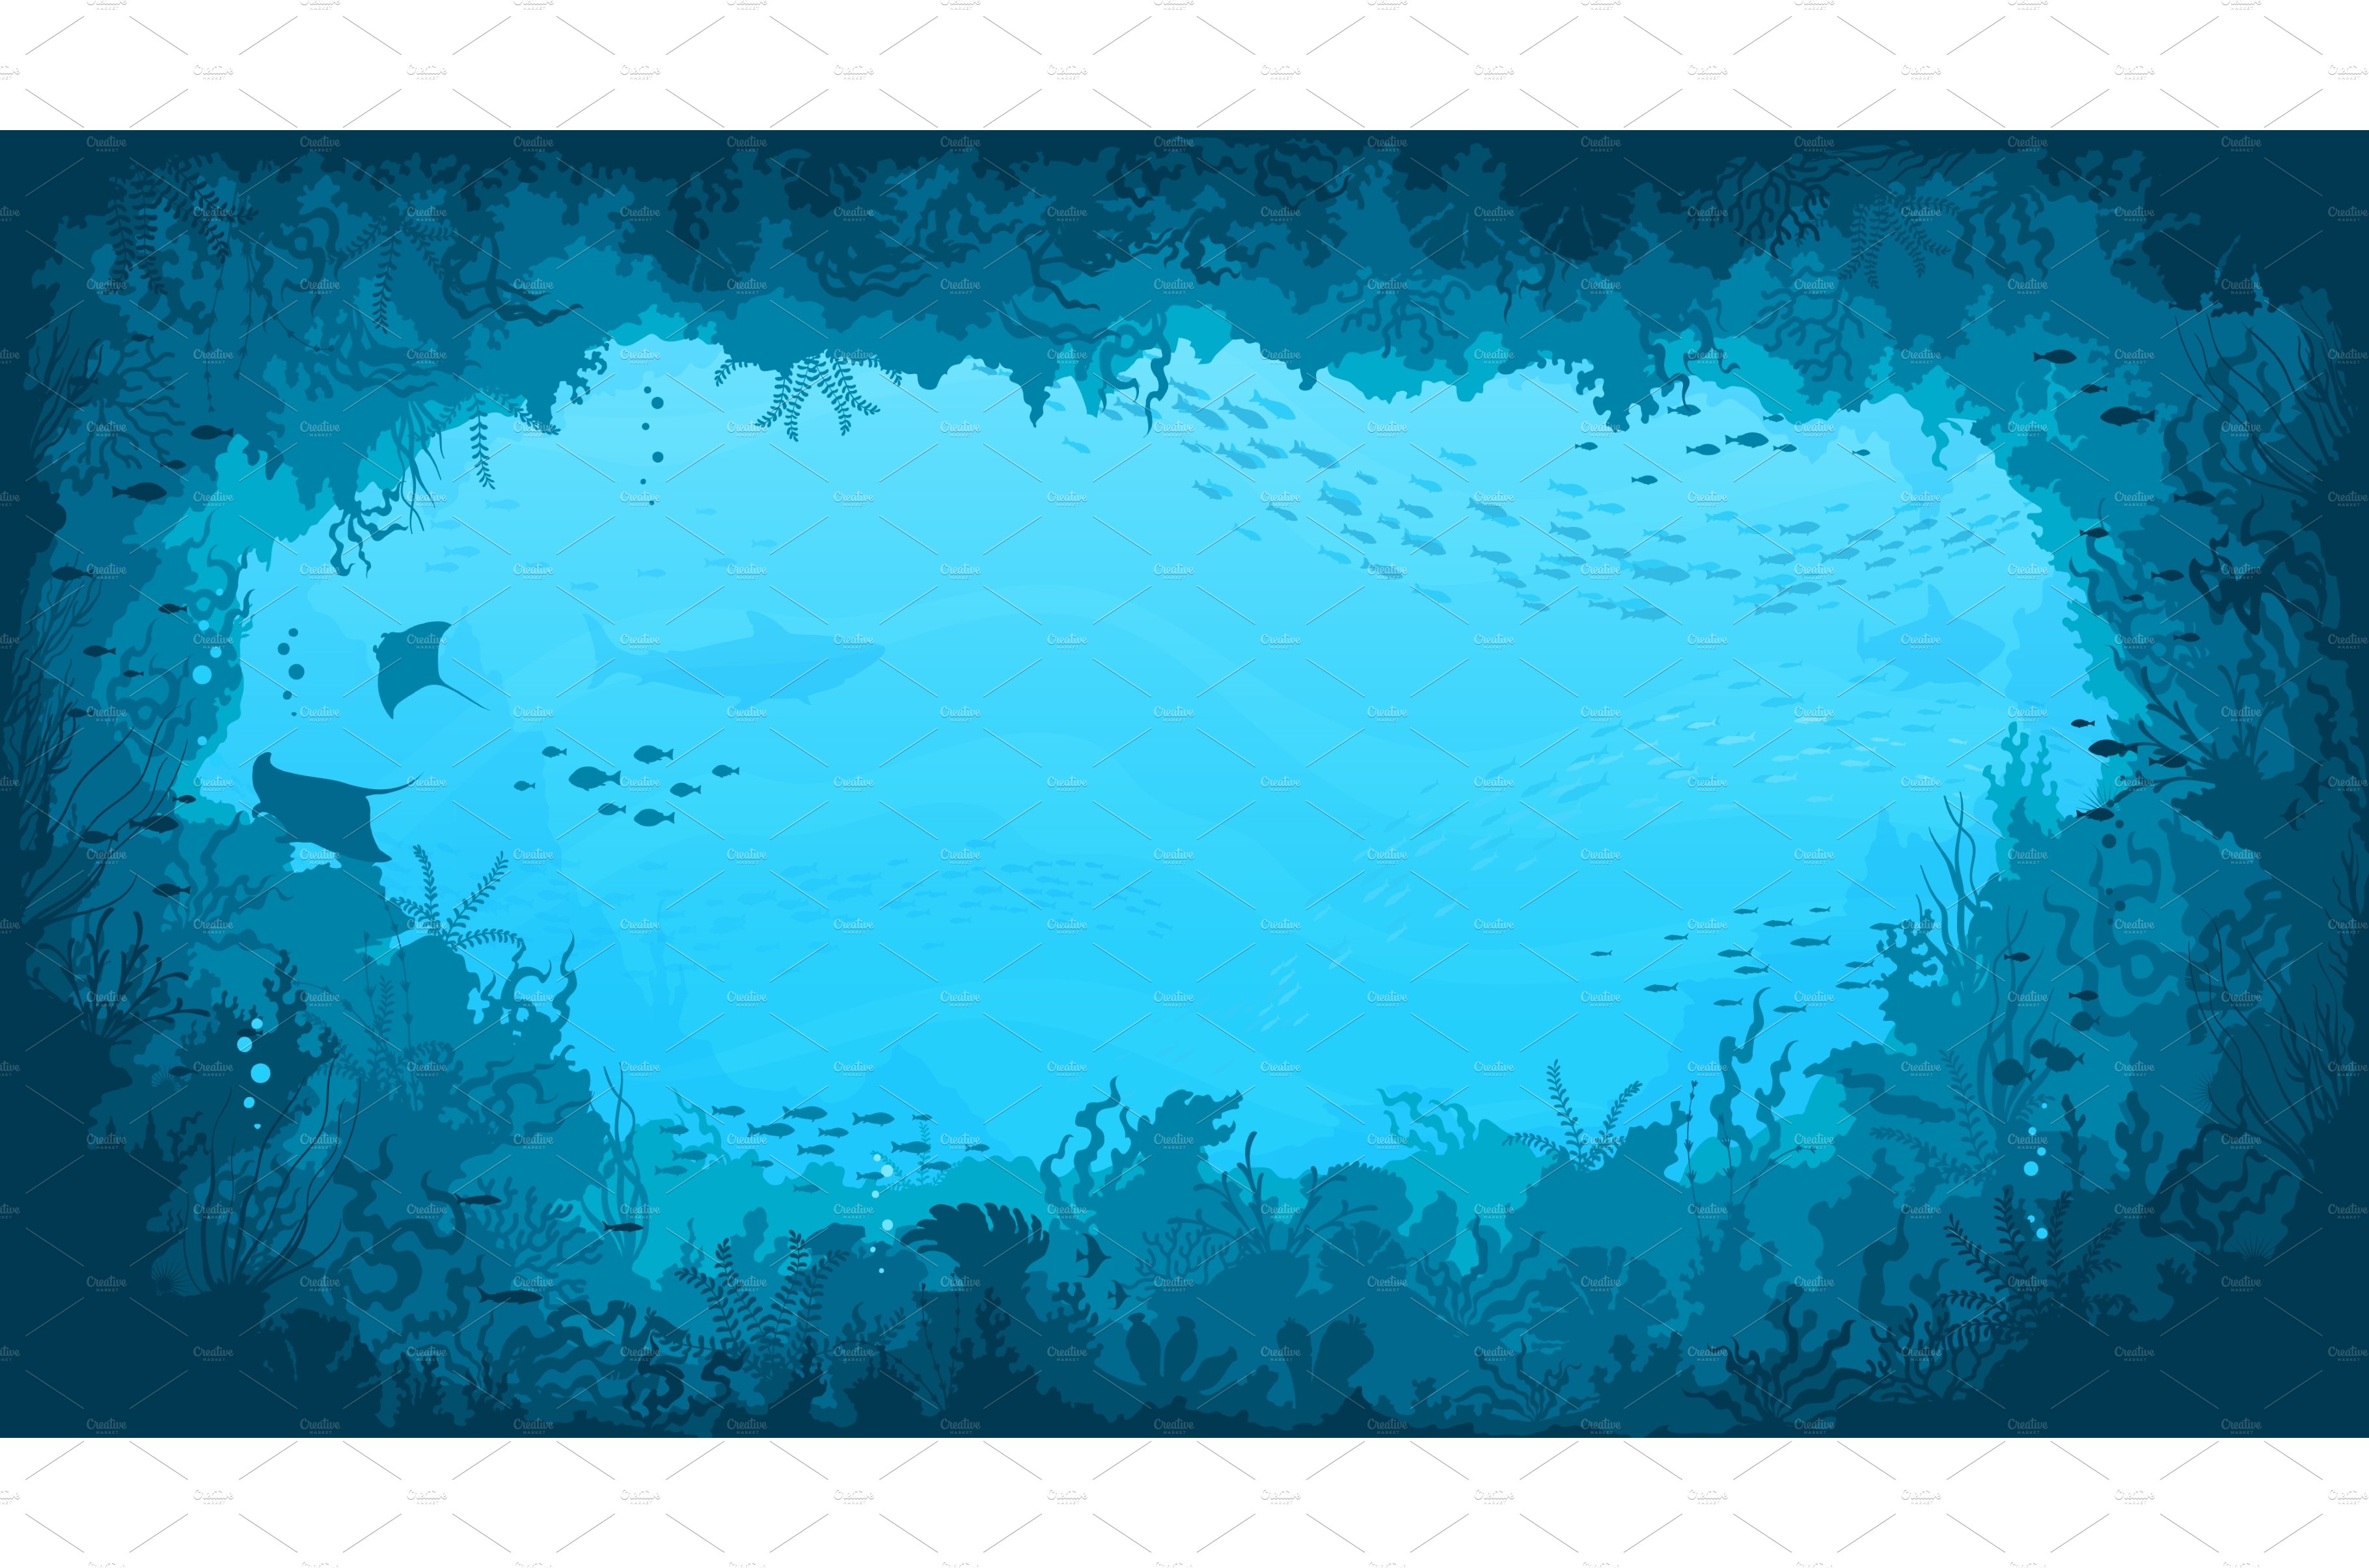 Underwater cave landscape cover image.